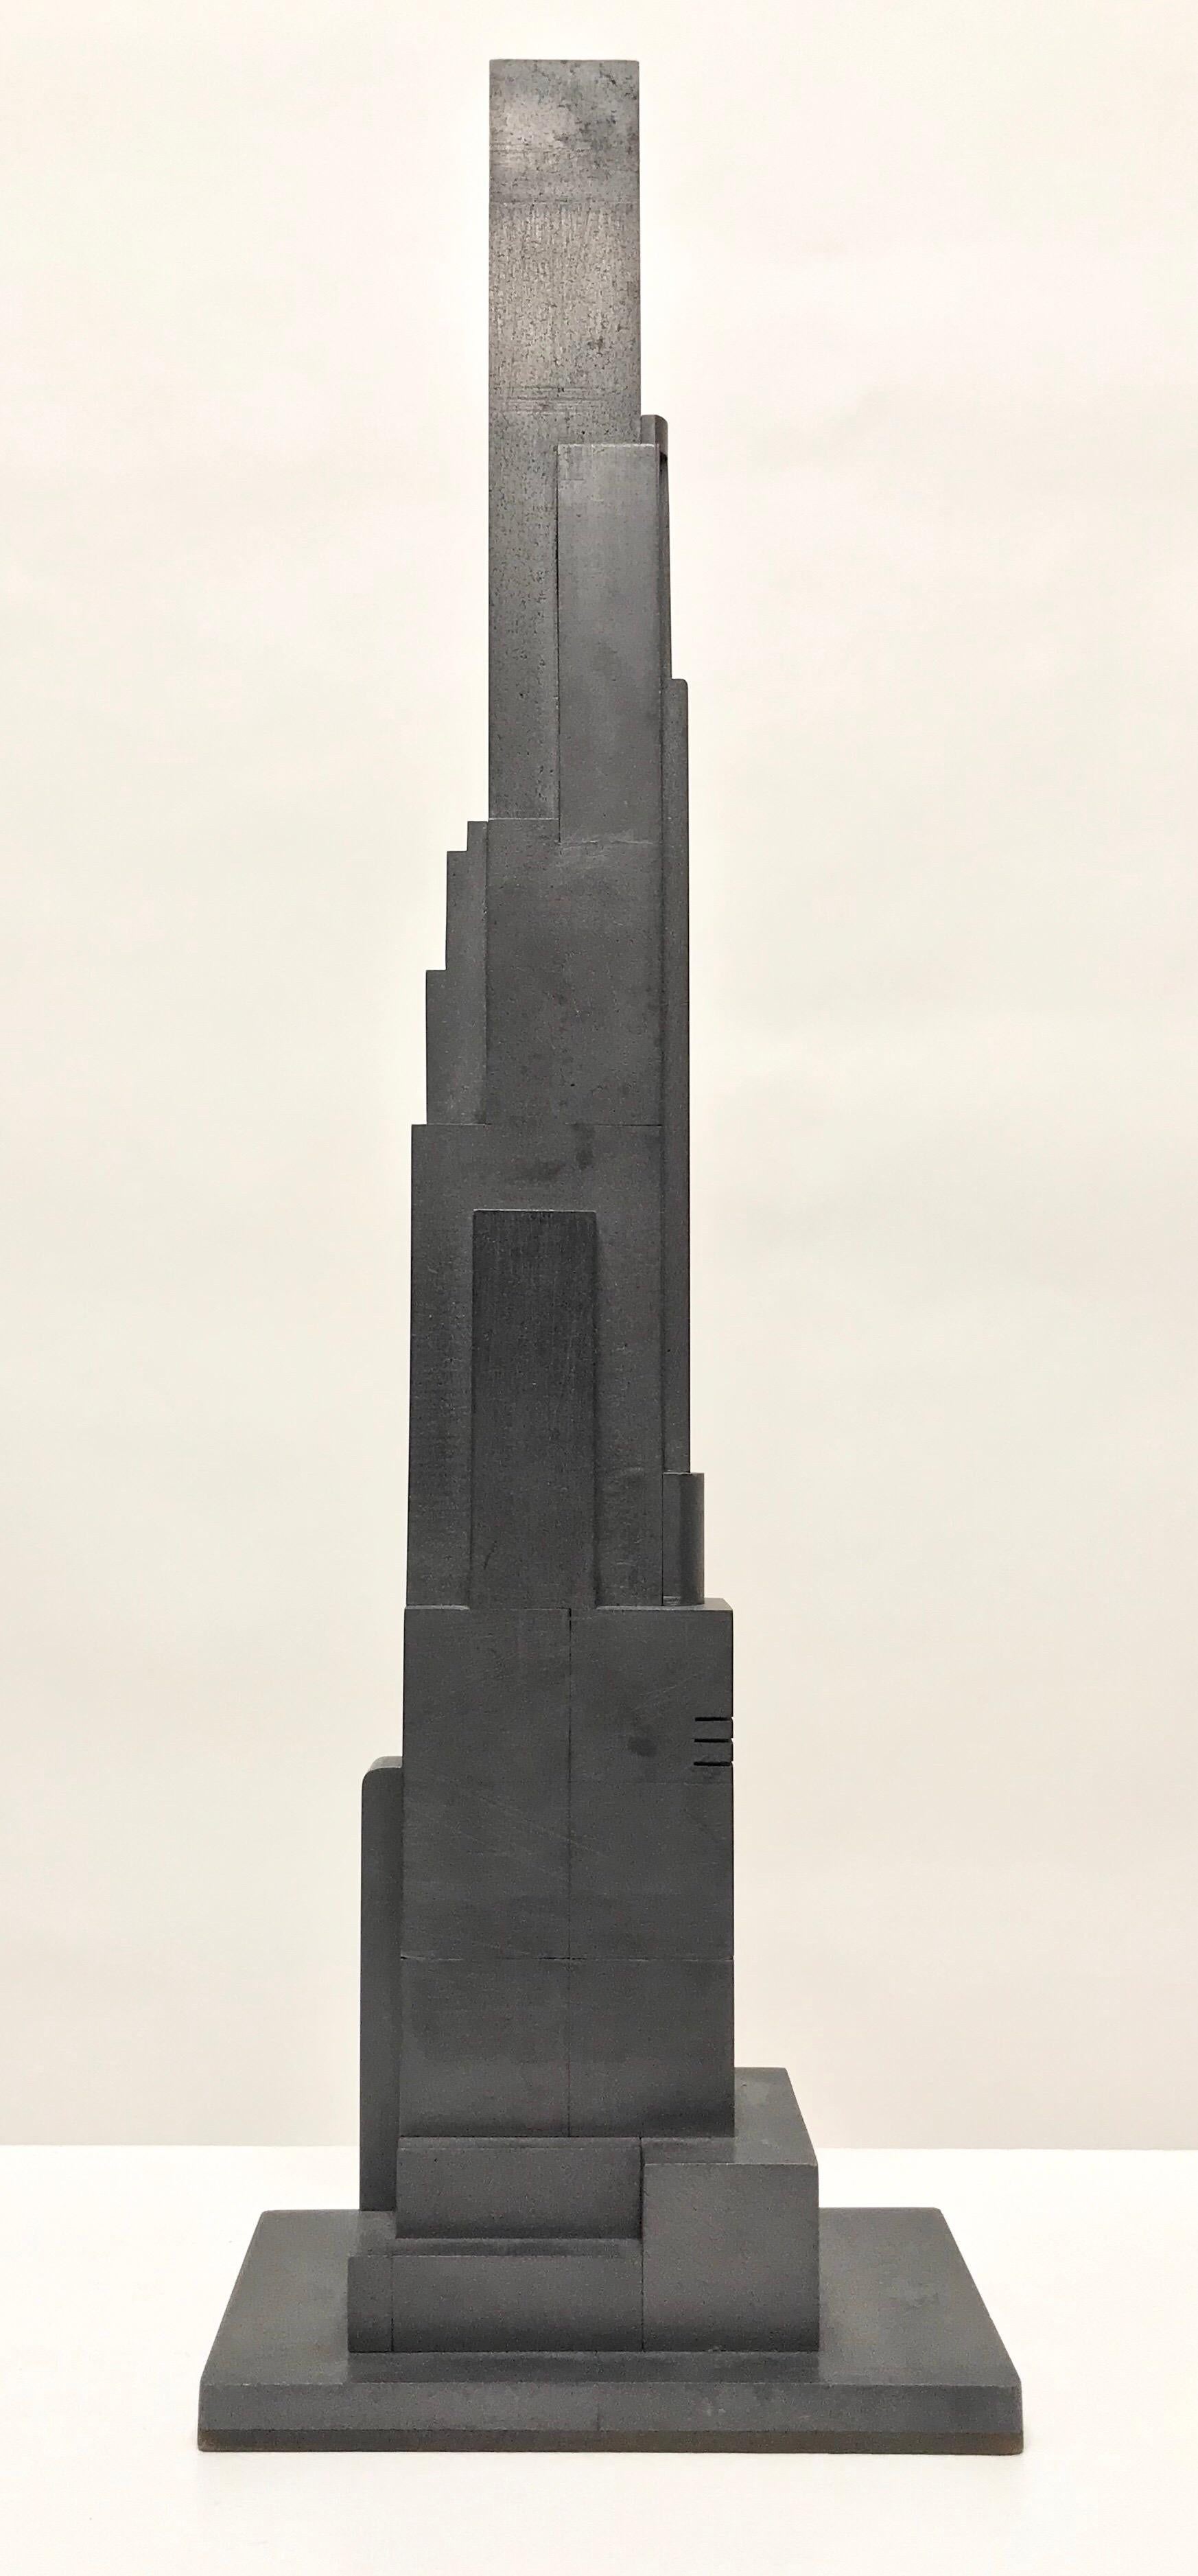 Skyscraper sculpture with a geometric form made of cast graphite.